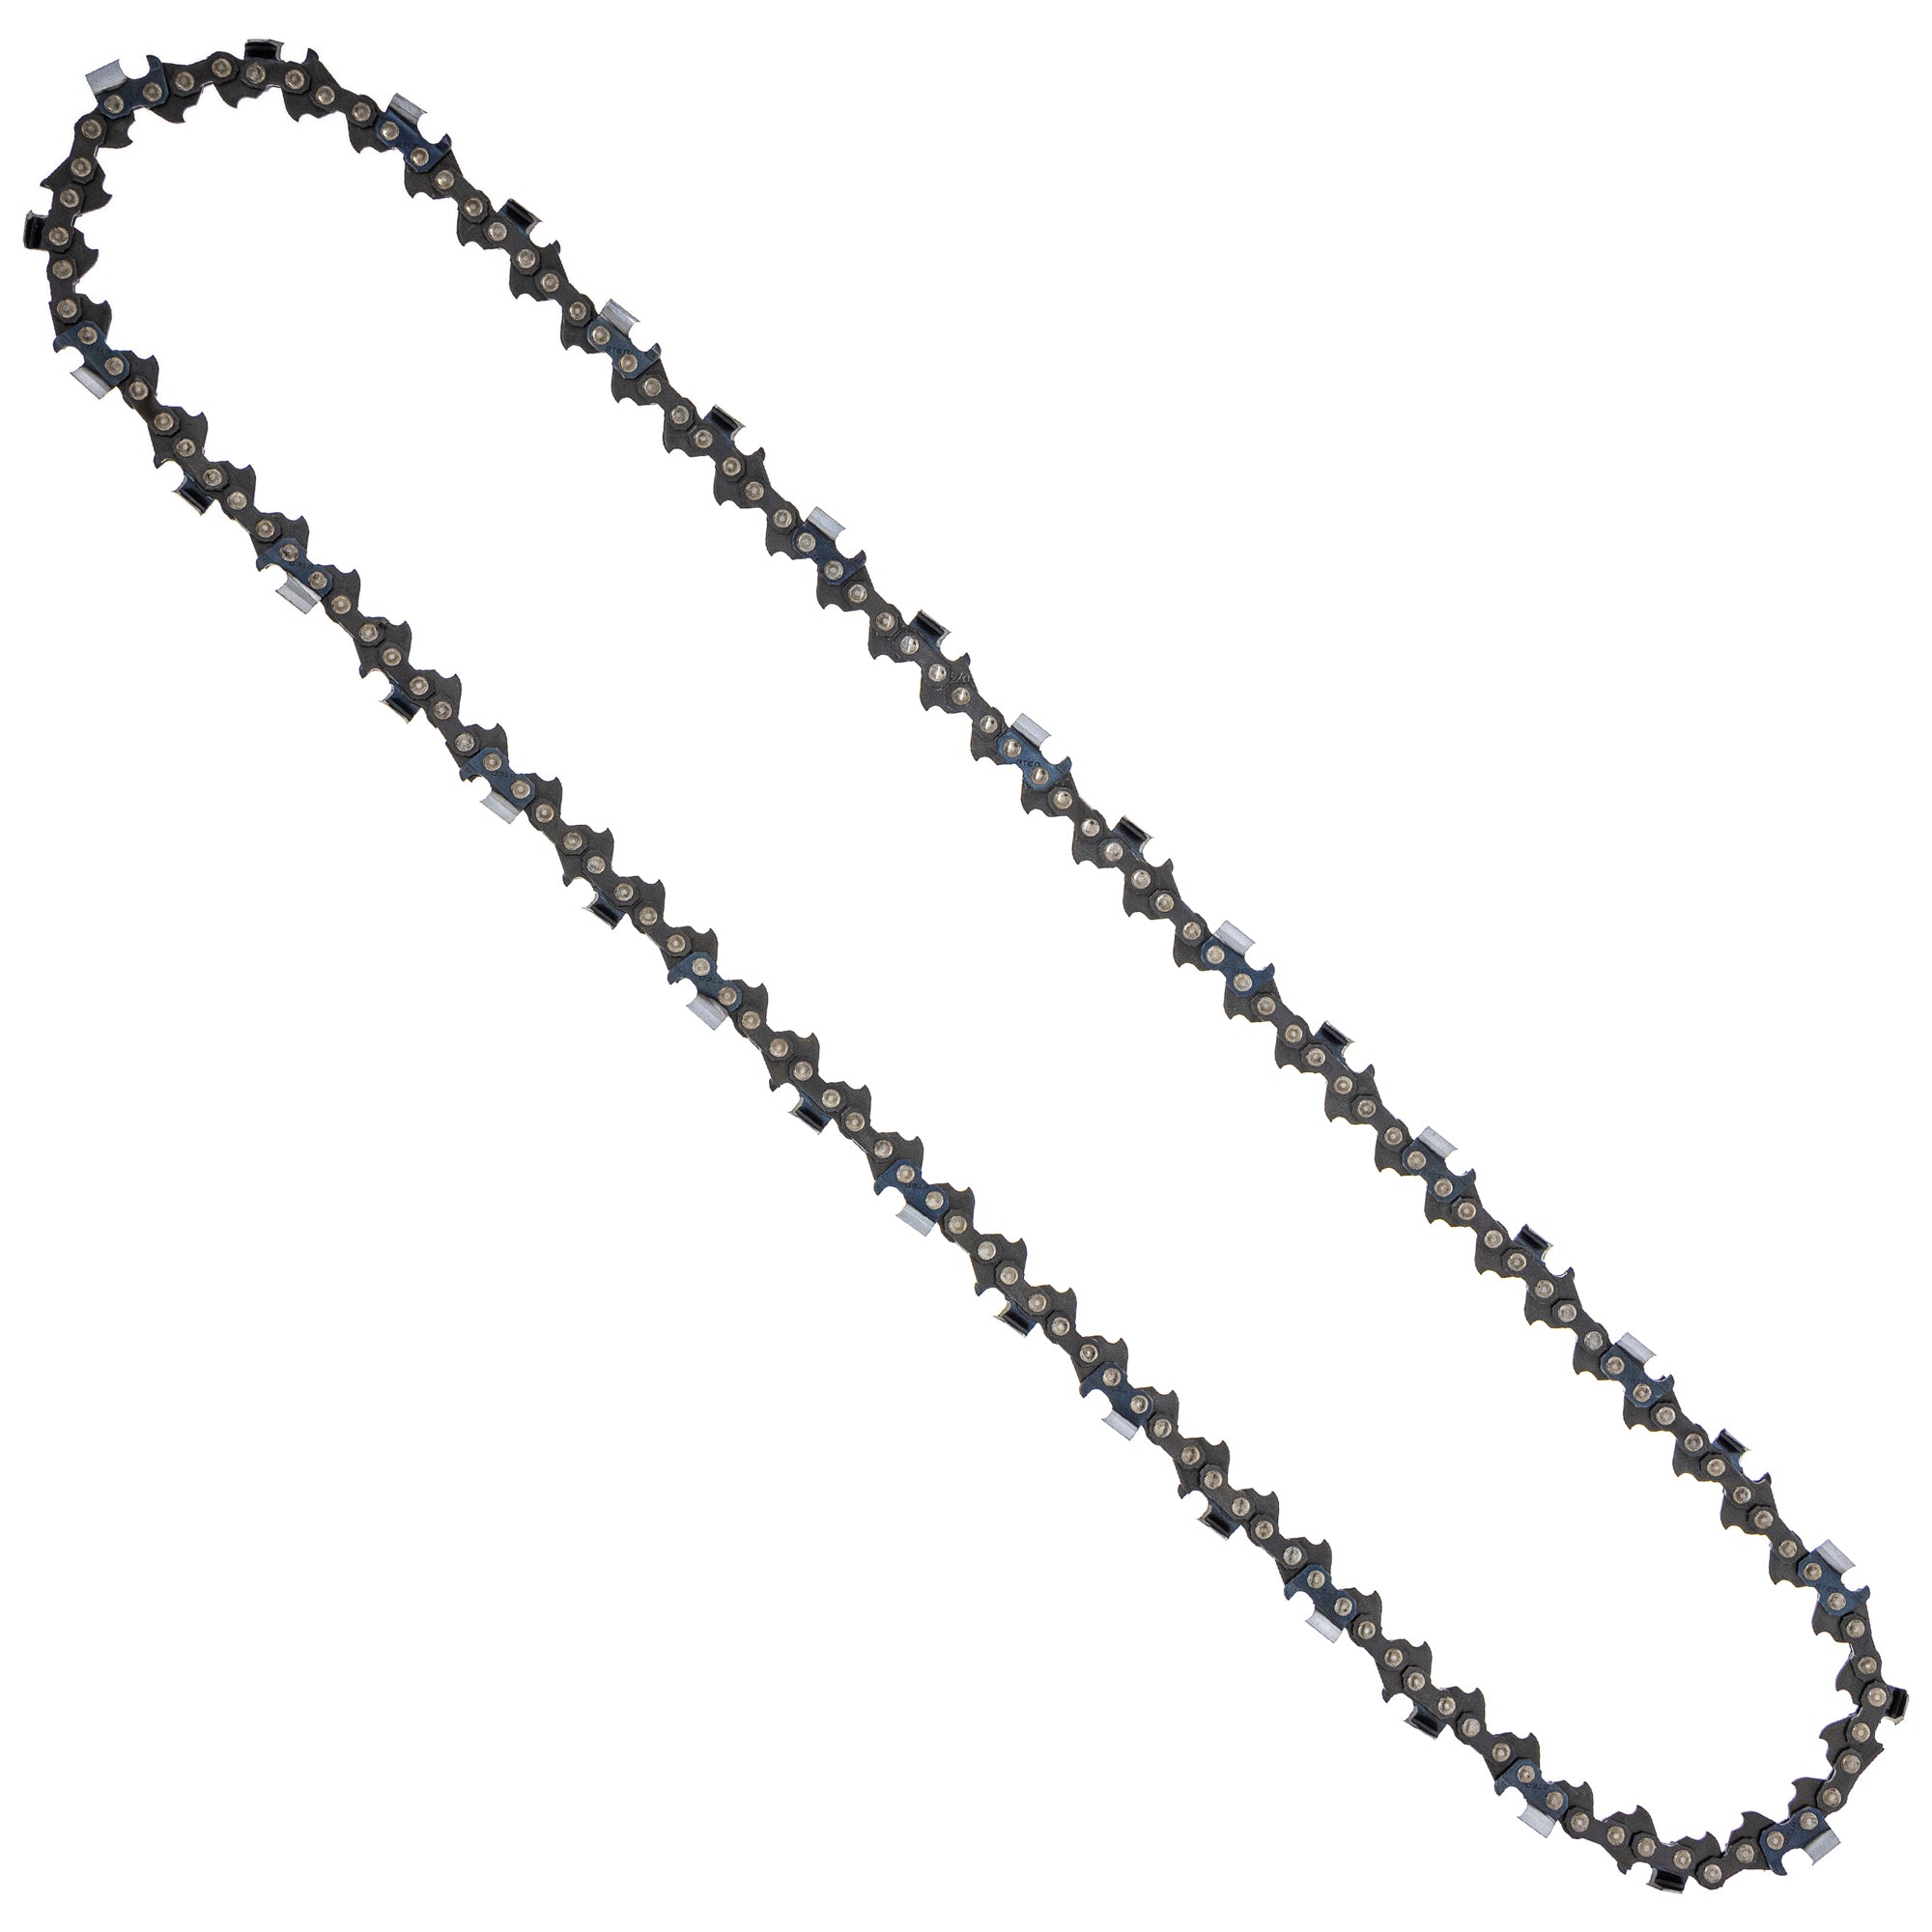 8TEN 810-CCC2263H Chain 5-Pack for zOTHER Oregon Husqvarna Poulan